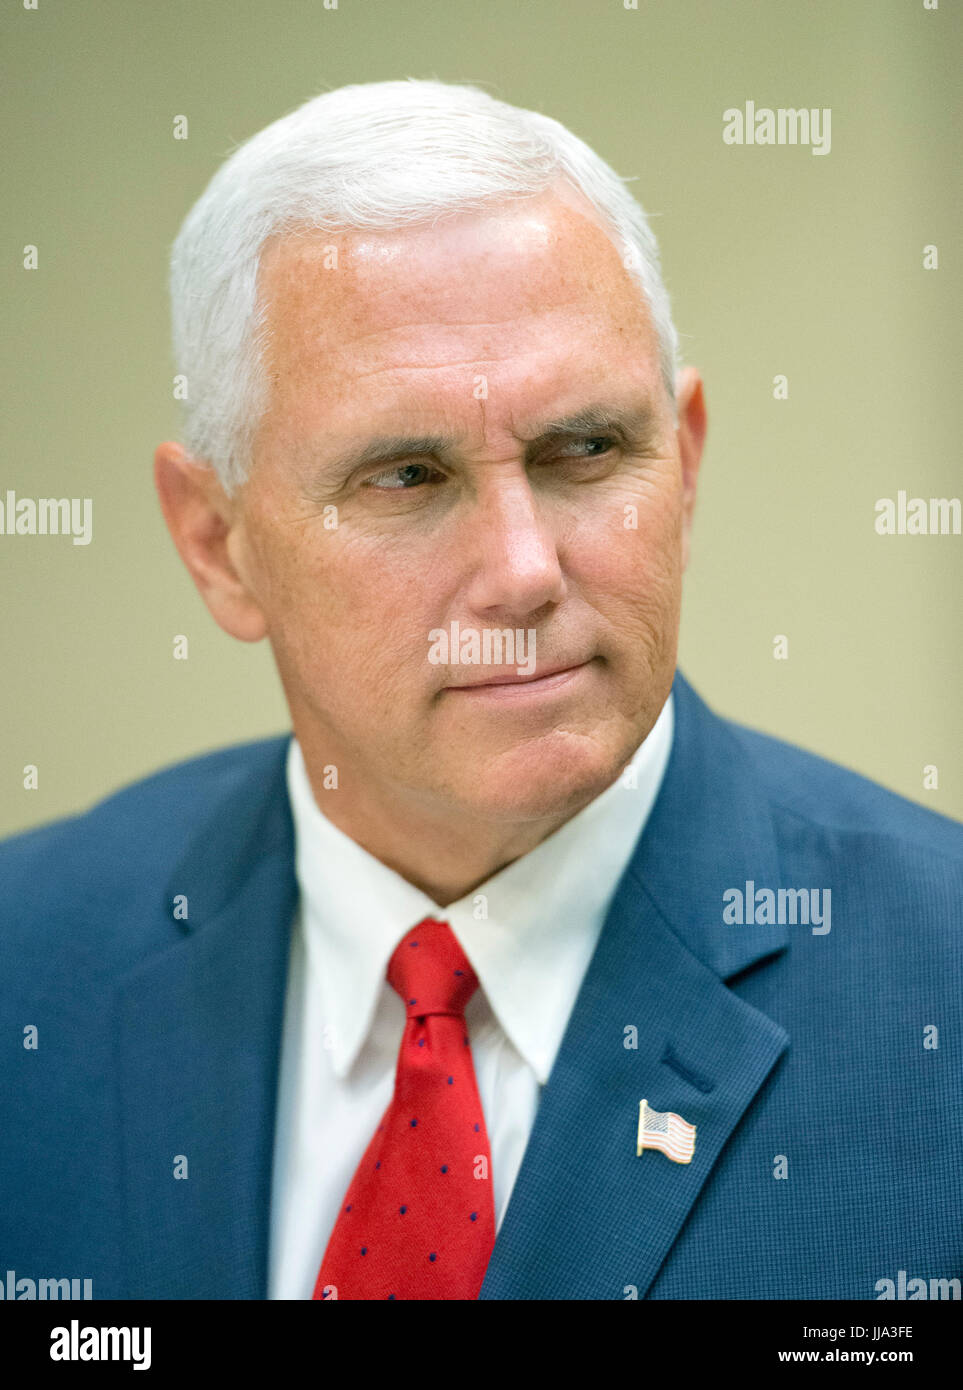 Washington, USA. 18th Jul, 2017. United States Vice President Mike Pence listens as President Donald J. Trump makes remarks to the press prior to having lunch with four veterans of Afghanistan in the Roosevelt Room of the White House in Washington, DC on Tuesday, July 18, 2017. In his remarks the President said he was "disappointed" about the GOP failure to pass a healthcare bill and said his plan was to "let Obamacare fail. Credit: MediaPunch Inc/Alamy Live News Stock Photo